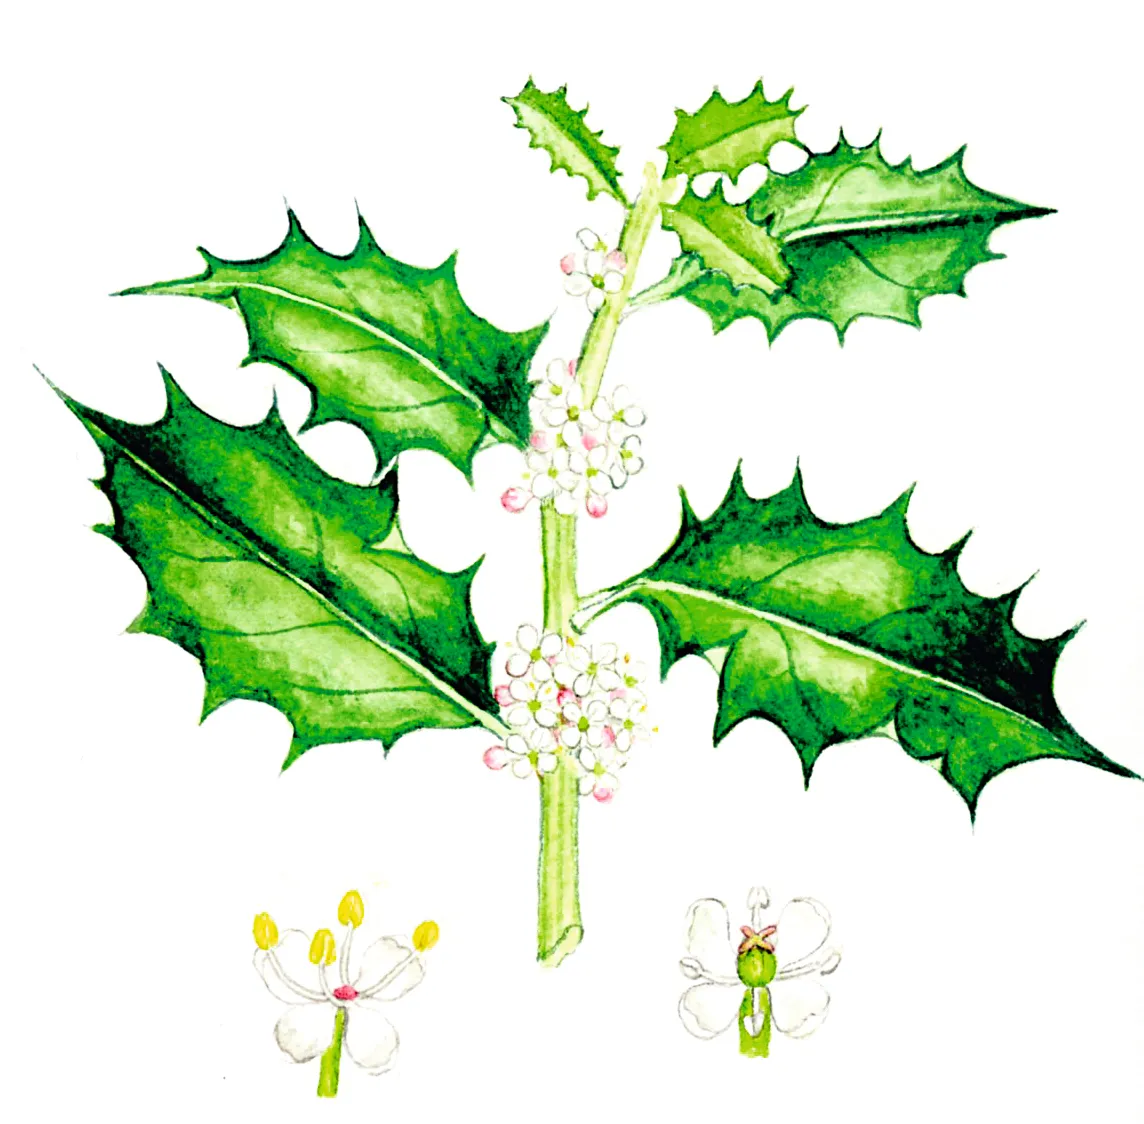 Illustration of holly blossom and leaves.